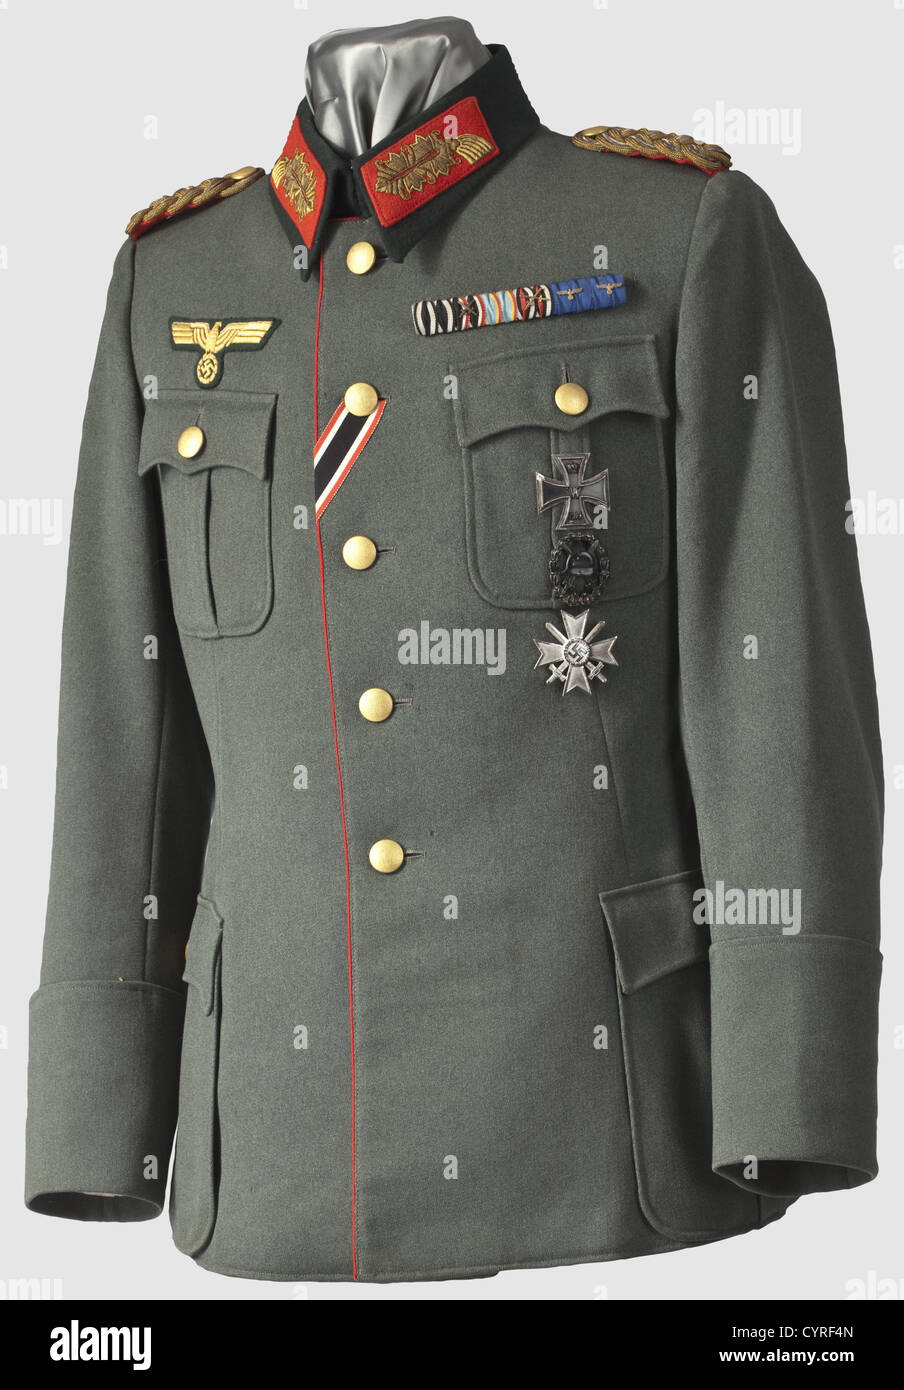 Generalmajor Max Hoffmann,A uniform tunic and documents Field blouse of fine field-grey gabardine with dark green collars and granular gold buttons,the green silk liner with tailor's label 'Kapser(?)Biberach-Riss'. Sewn-on shoulder boards with plain underlay,red collar tabs with gold Larisch embroidery,gold cello-embroidered eagle(re-sewn)with contrasting brown feathers. War Merit Cross buttonhole ribbon,small field orders clasp,Iron Cross 1st Class of 1914,Wound historic,historical,1930s,1930s,20th century,army,armies,armed forces,military,m,Additional-Rights-Clearences-Not Available Stock Photo